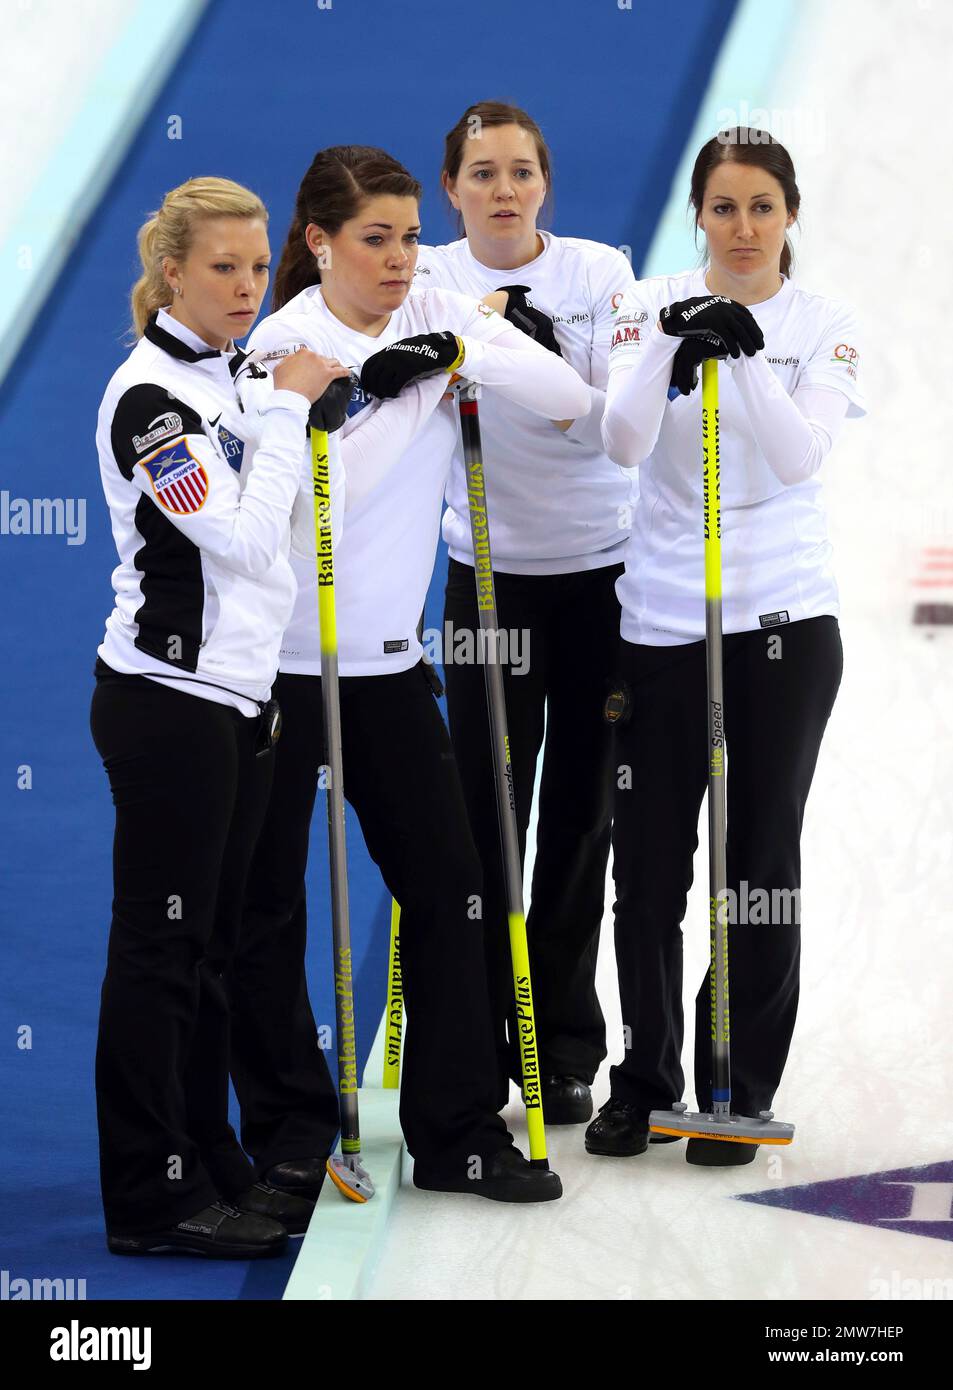 Members of the United States team, from left, Nina Roth, Becca Hamilton, Aileen Geving, and Tabitha Peterson watch the action during their match against Switzerland in the CPT World Womens Curling Championship